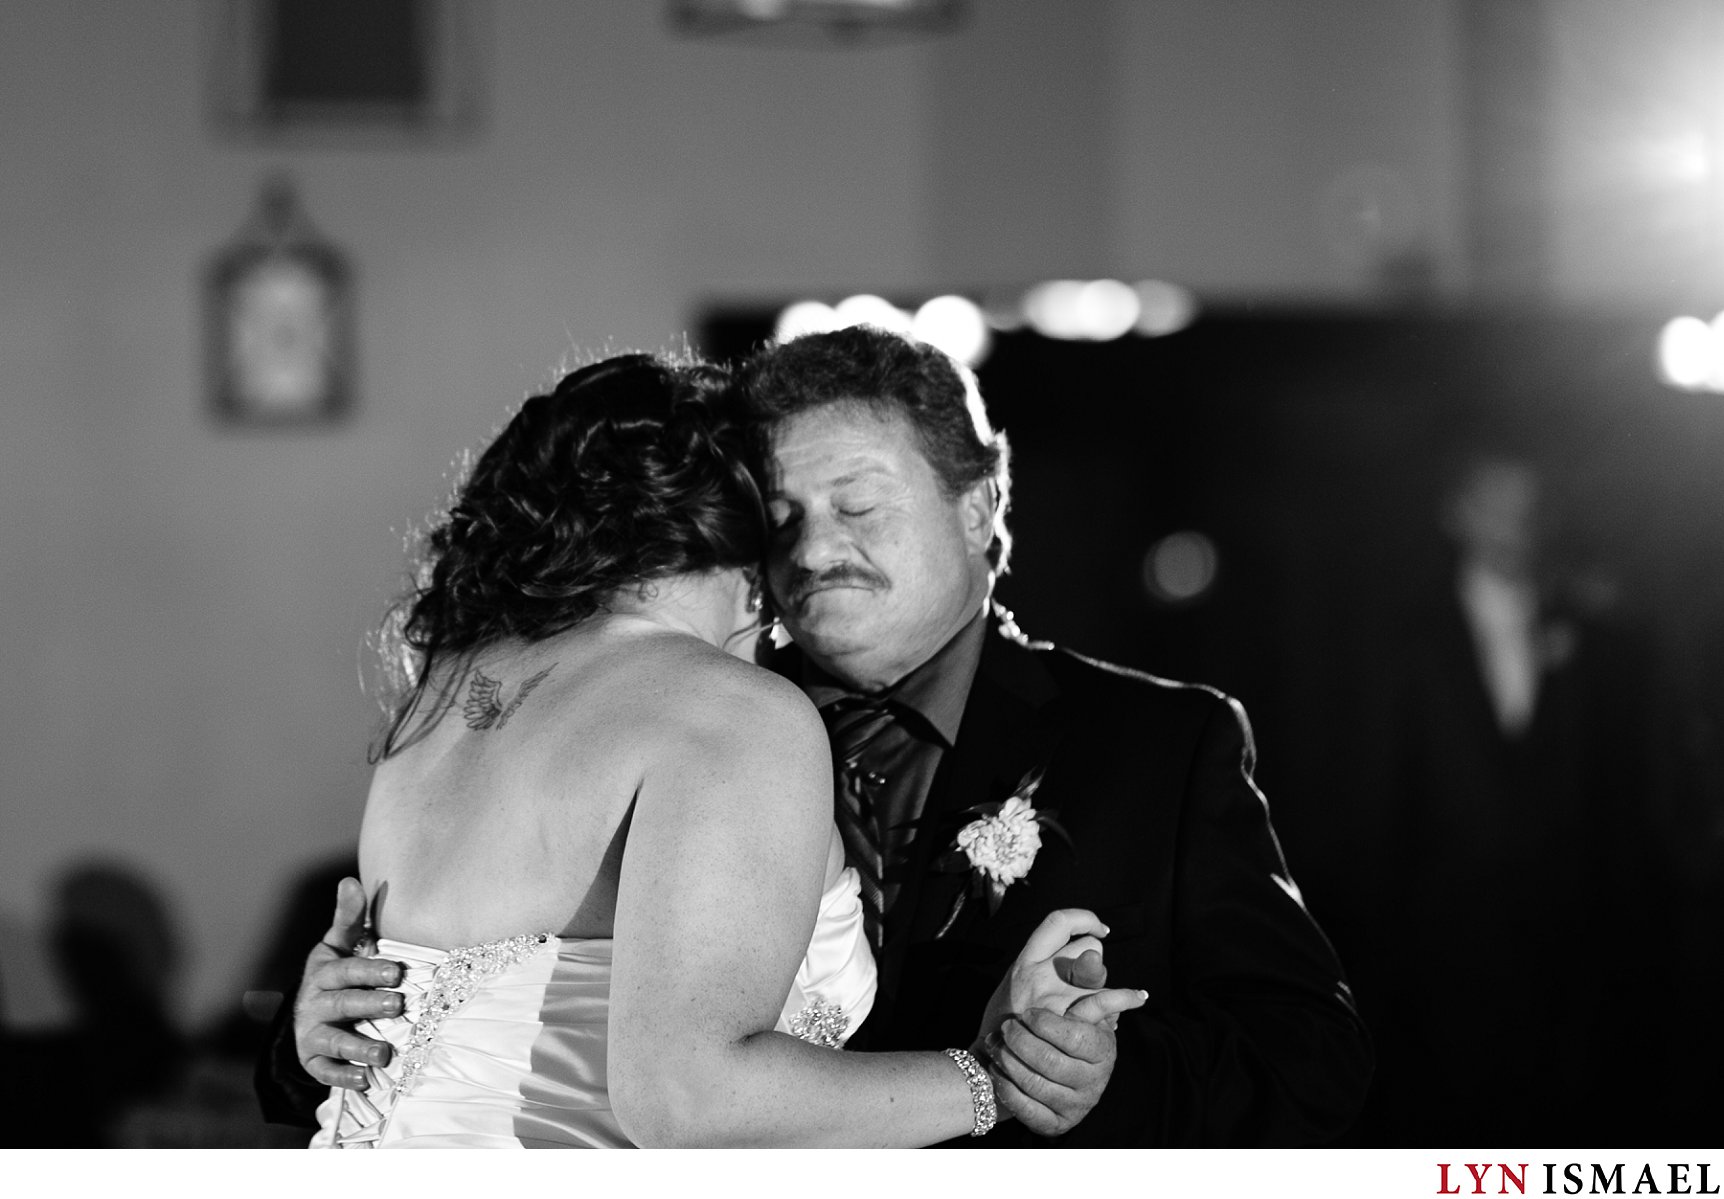 A father of the bride dances with his daughter.